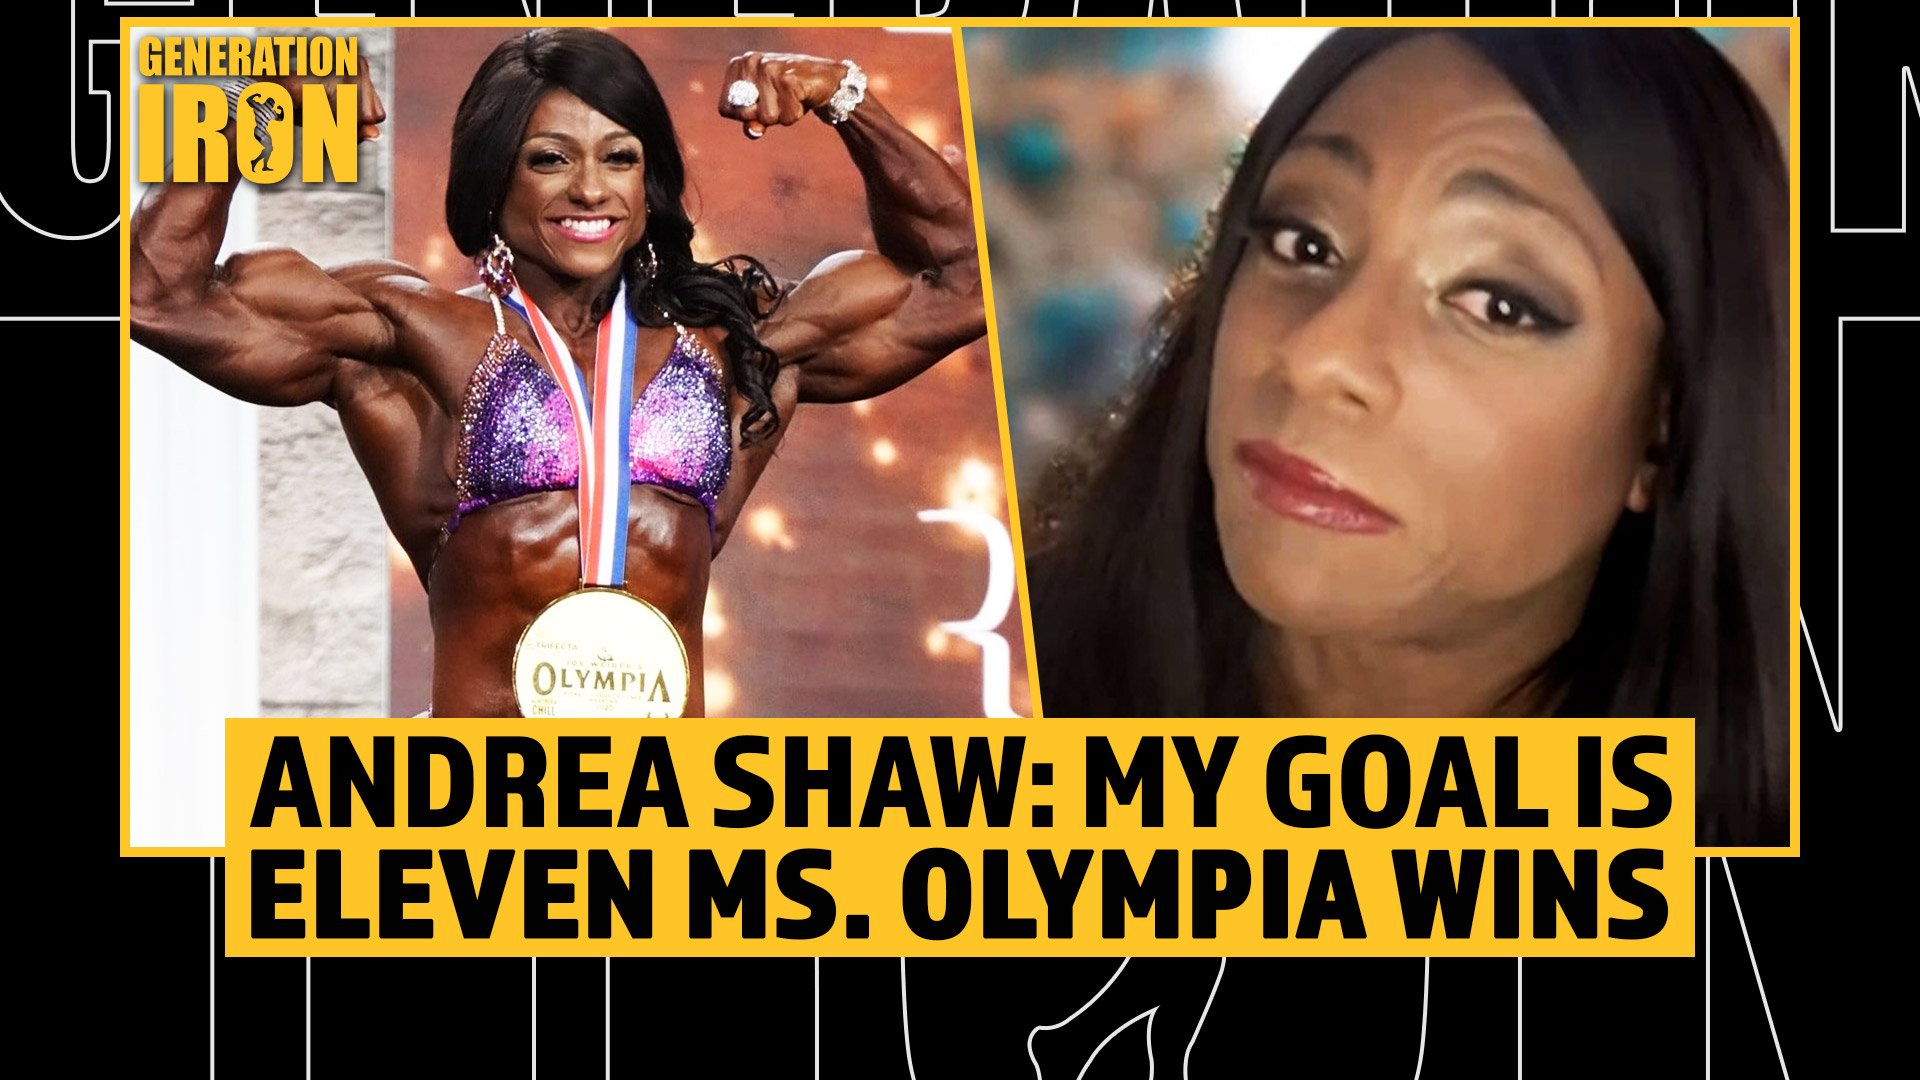 Andrea Shaw: My Personal Goal Is To Win 11 Ms. Olympia Titles